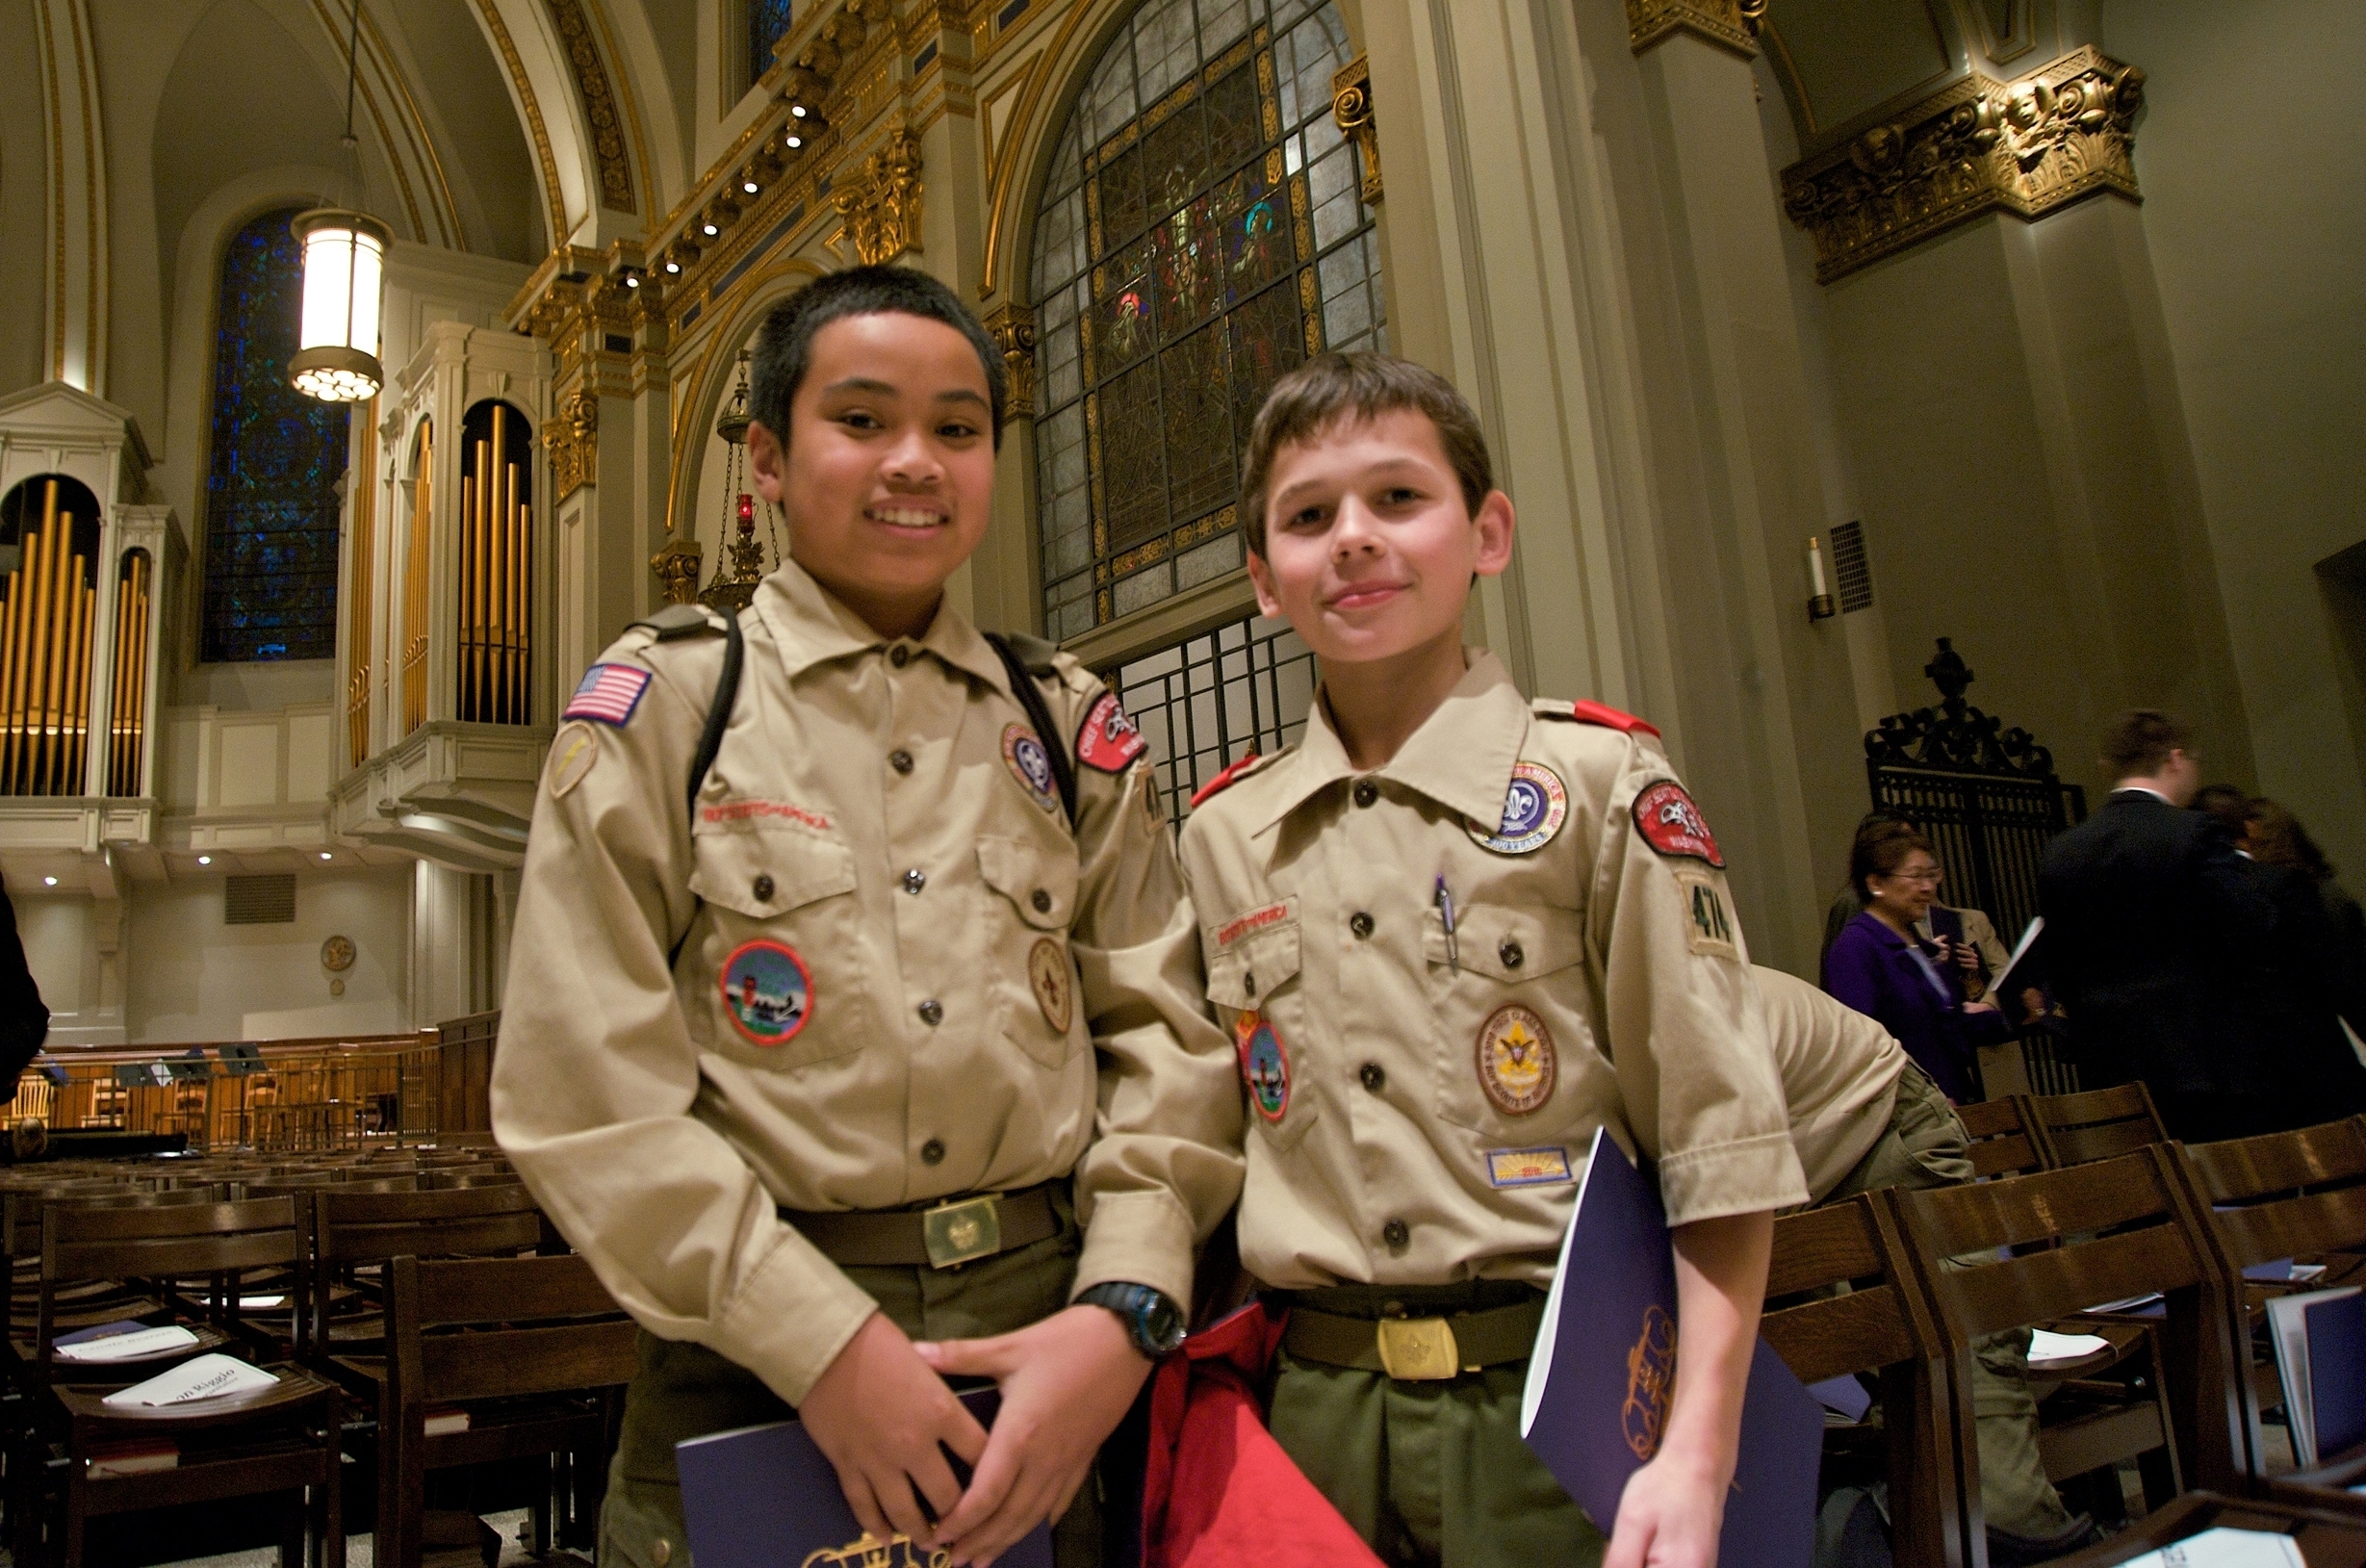 Two boy scouts at St. James Cathedral in Seattle, December 1, 2010